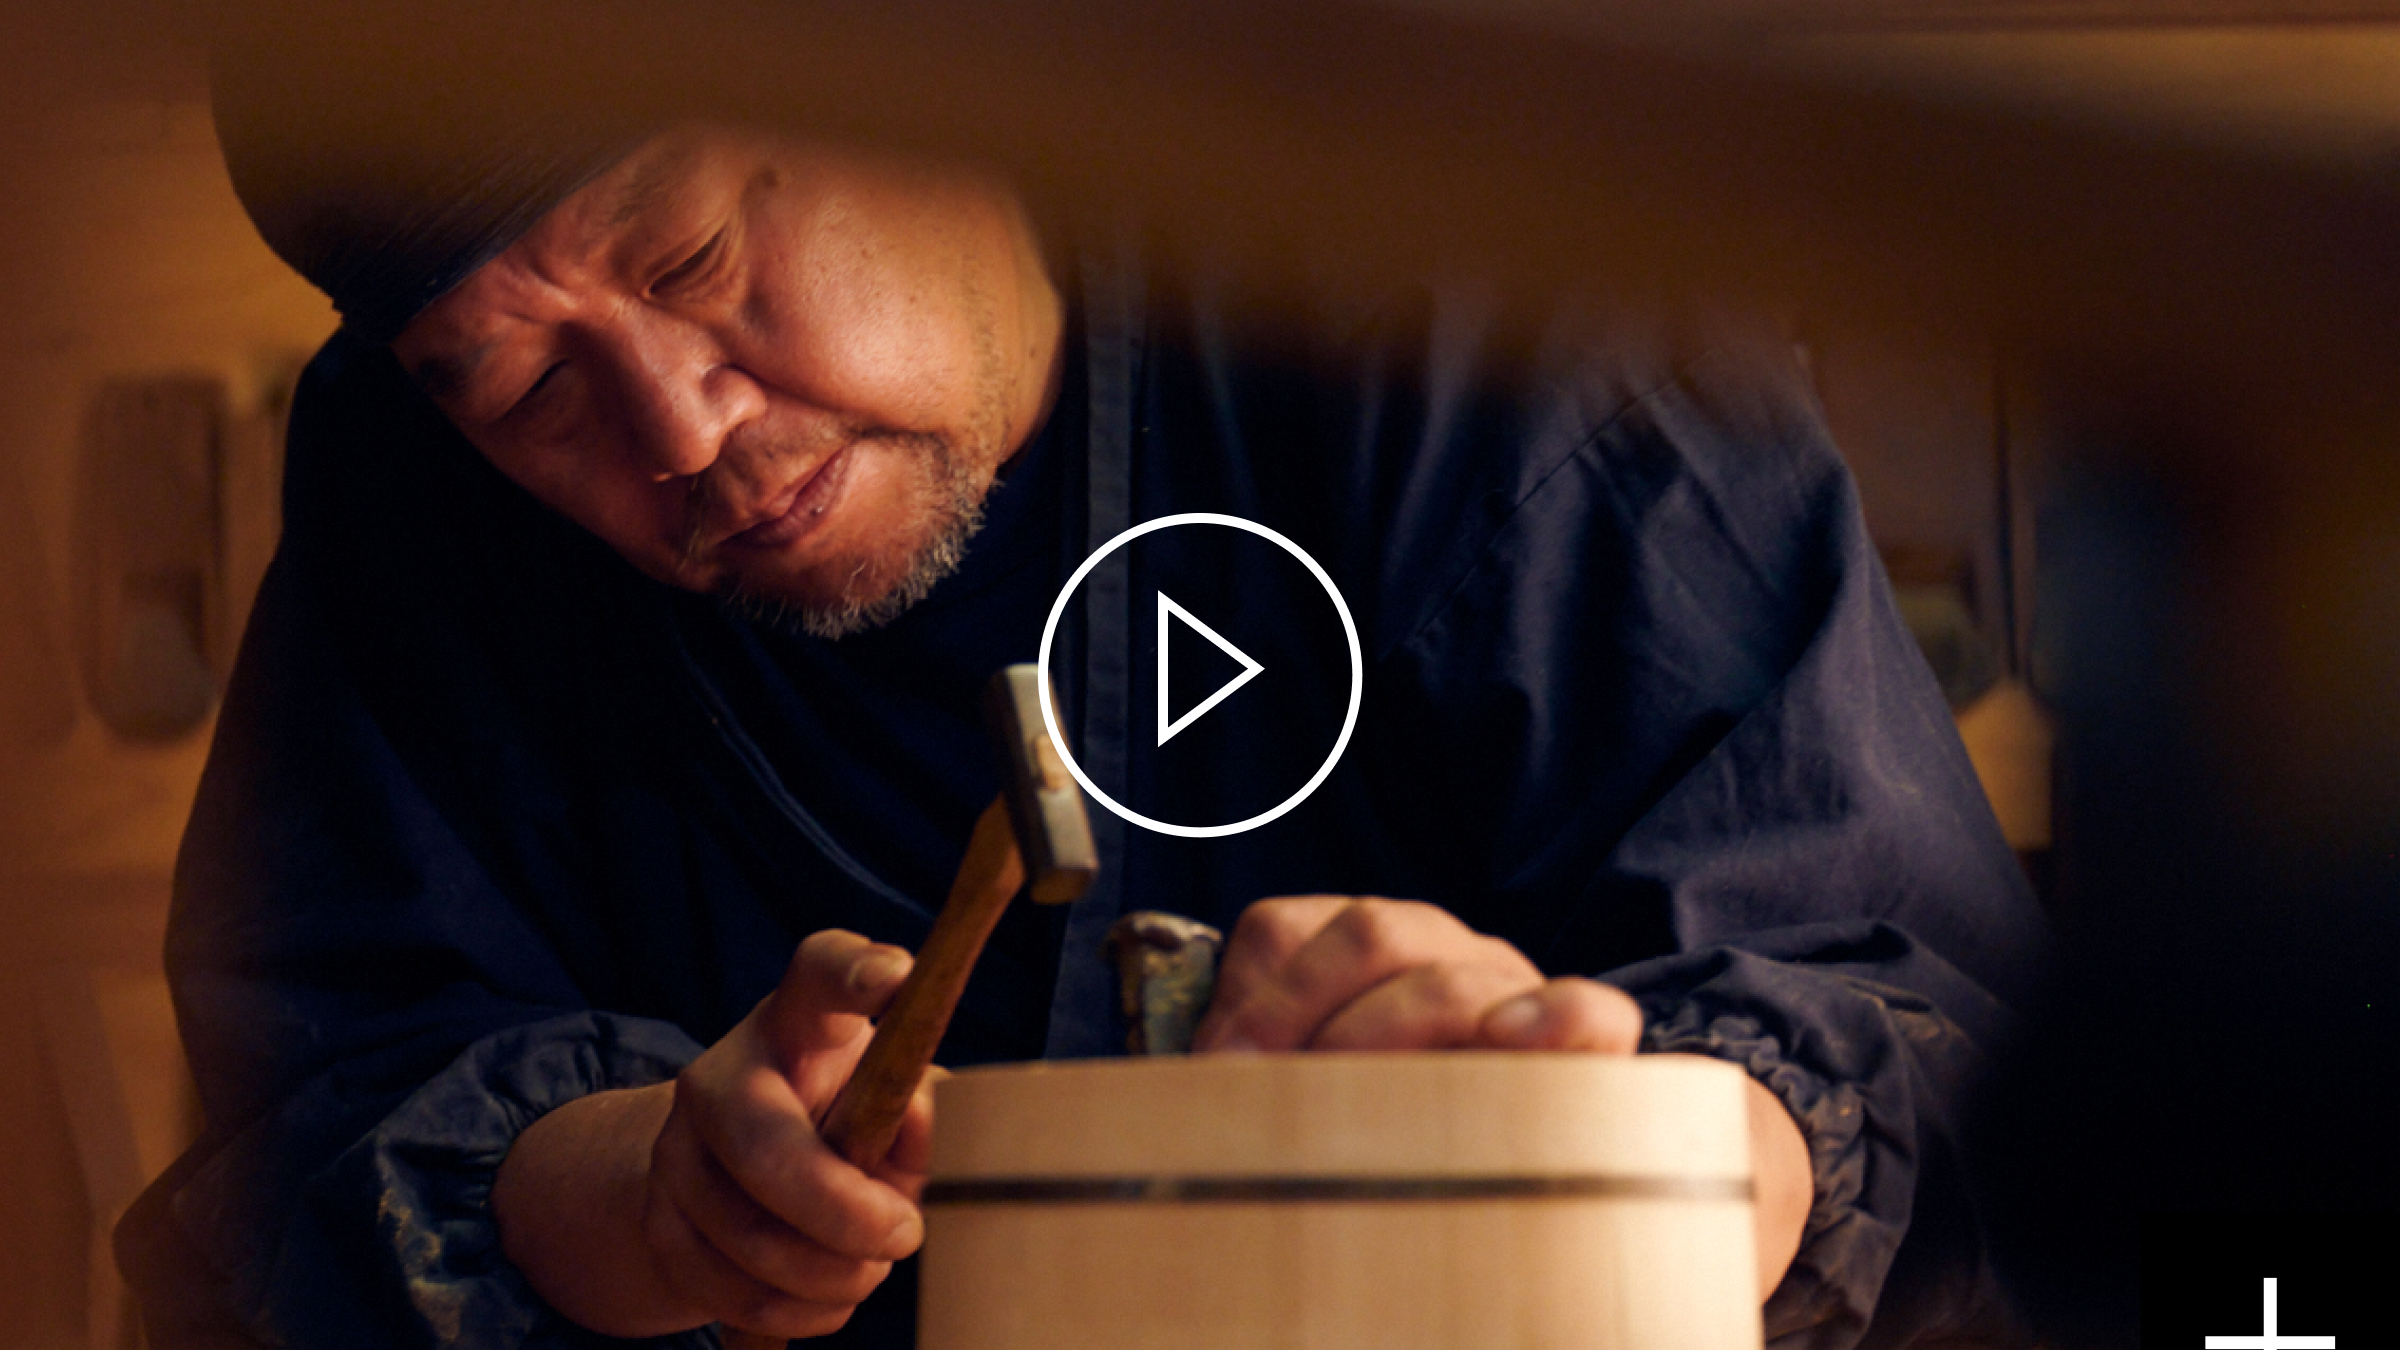 A Japanese craftsman hammering a wooden bowl in Kyoto.